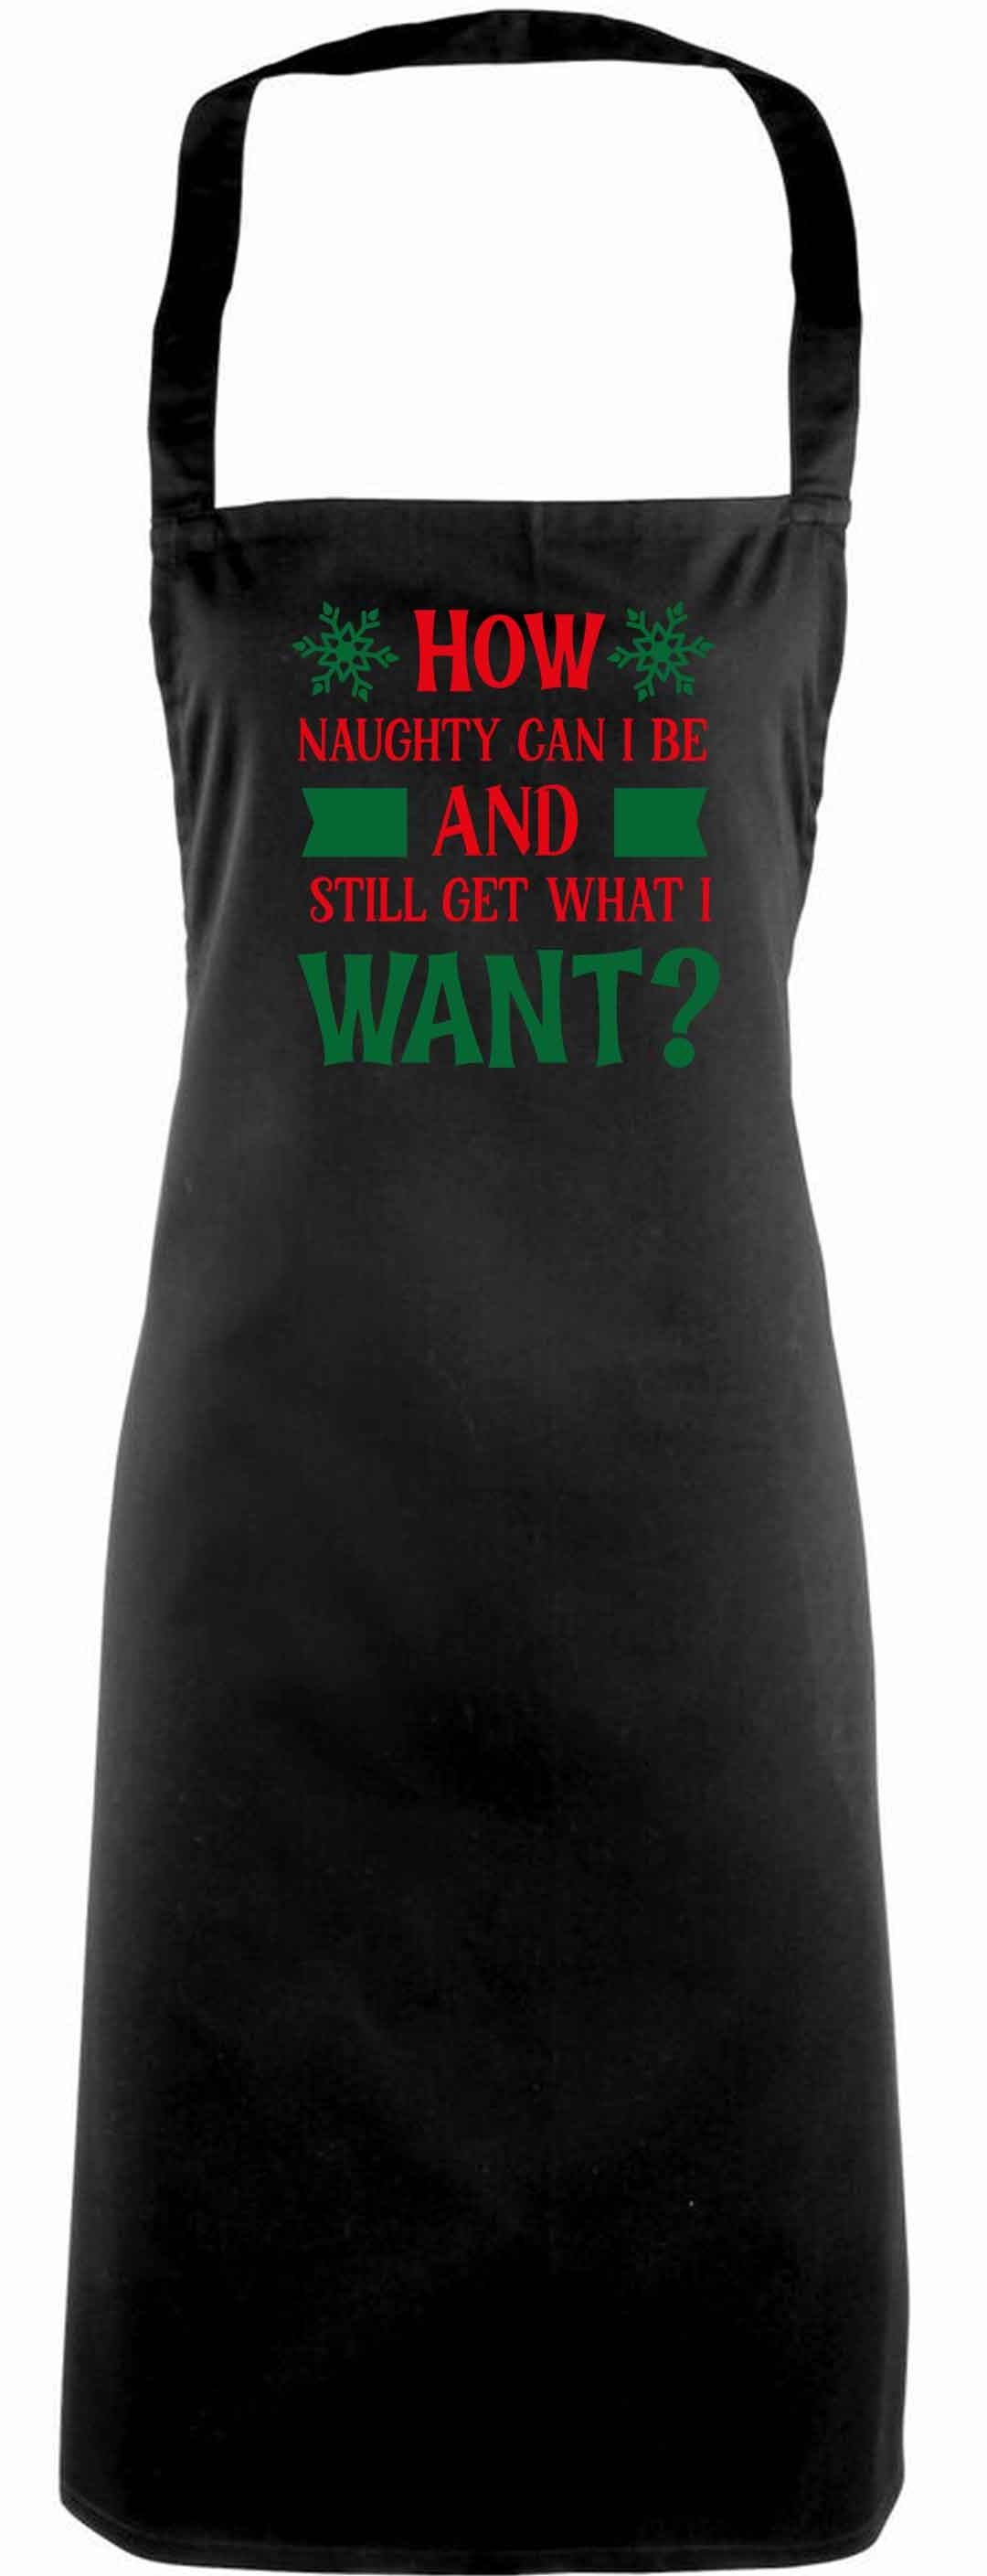 How naughty can I be and still get what I want? adults black apron